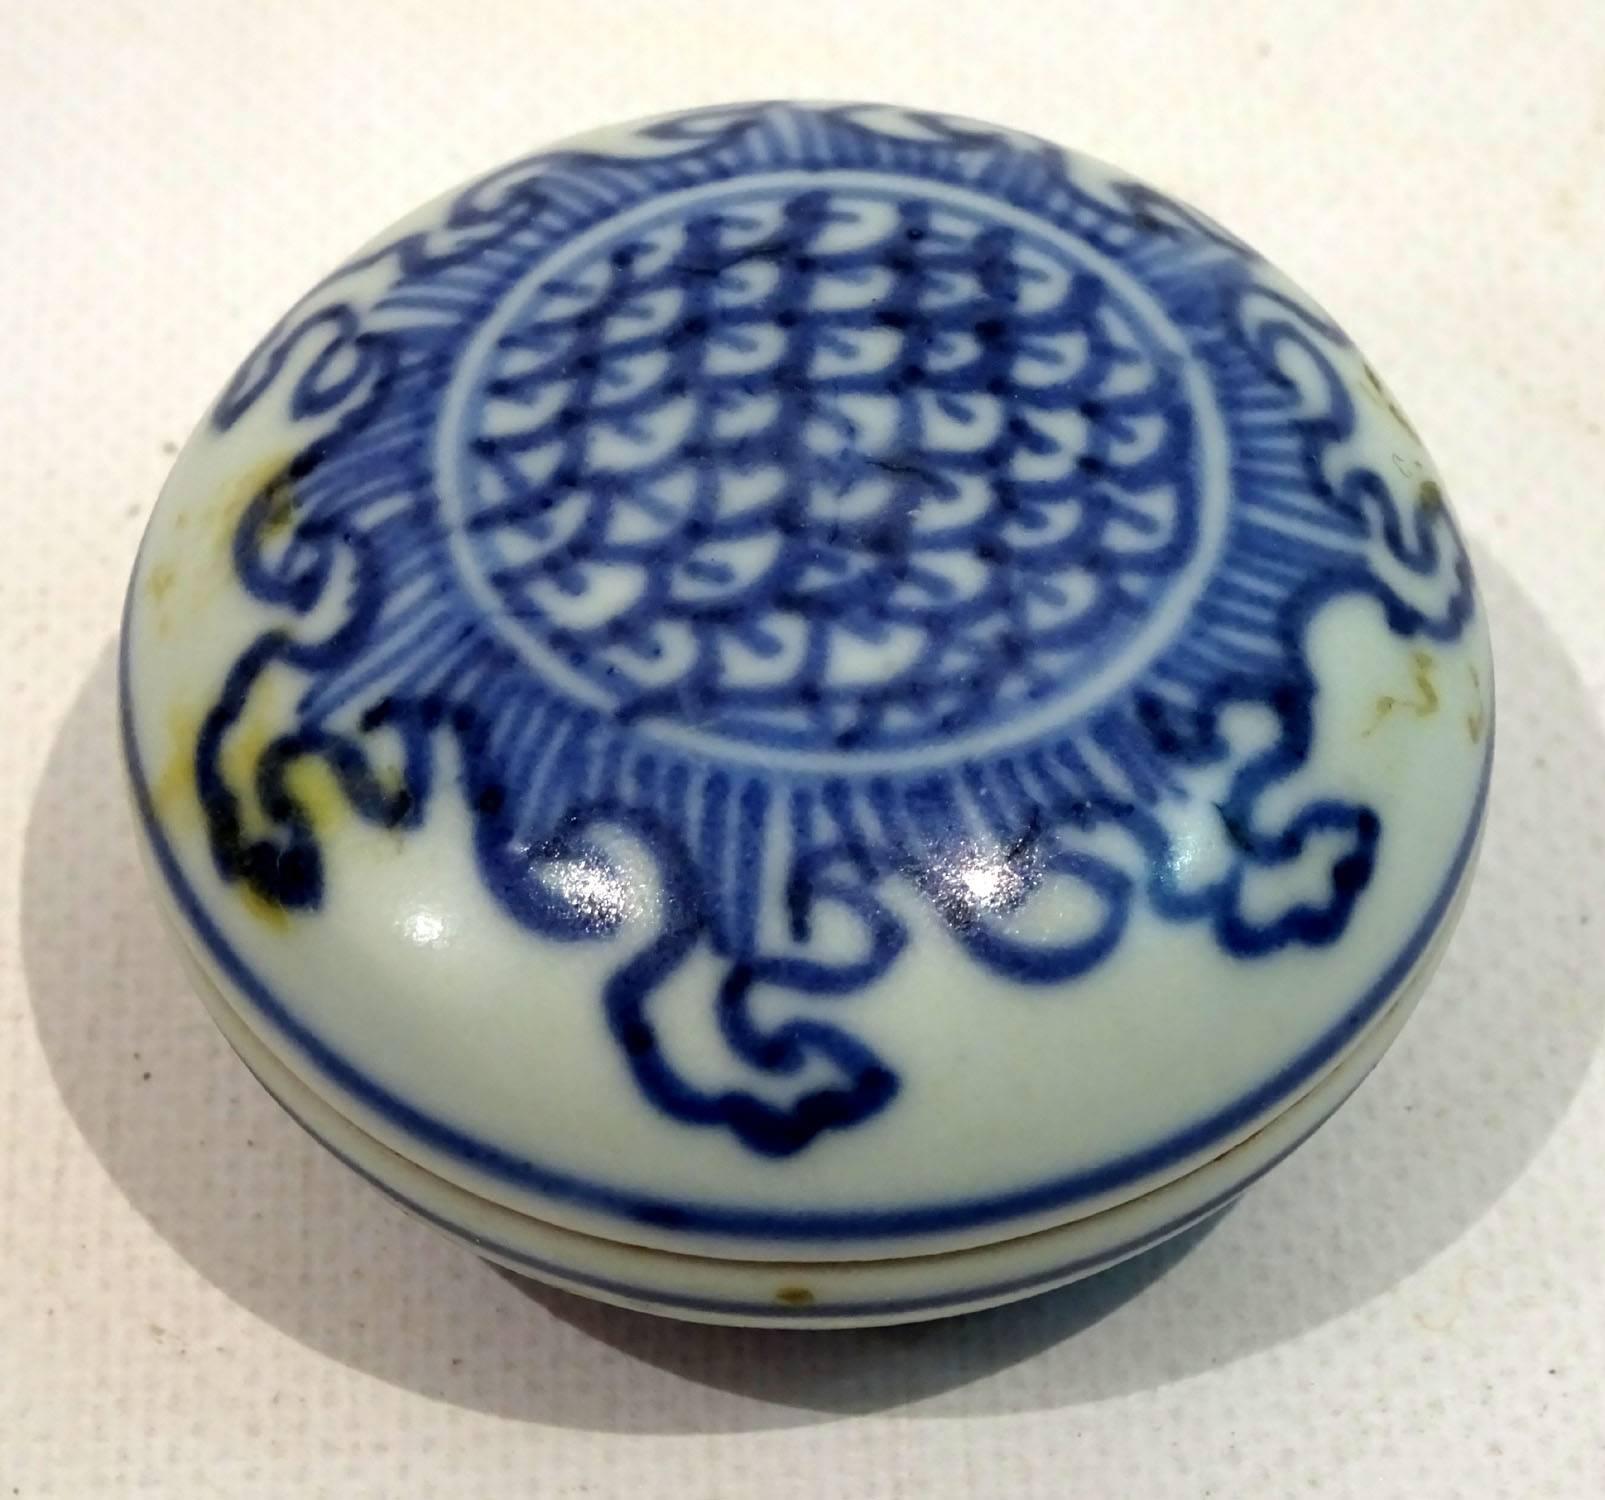 17th century Chinese blue and white porcelain box with lid from The Hatcher Collection, salvaged by Captain Michael Hatcher in the early 1980s, purchased from Christies in Amsterdam in 1984.